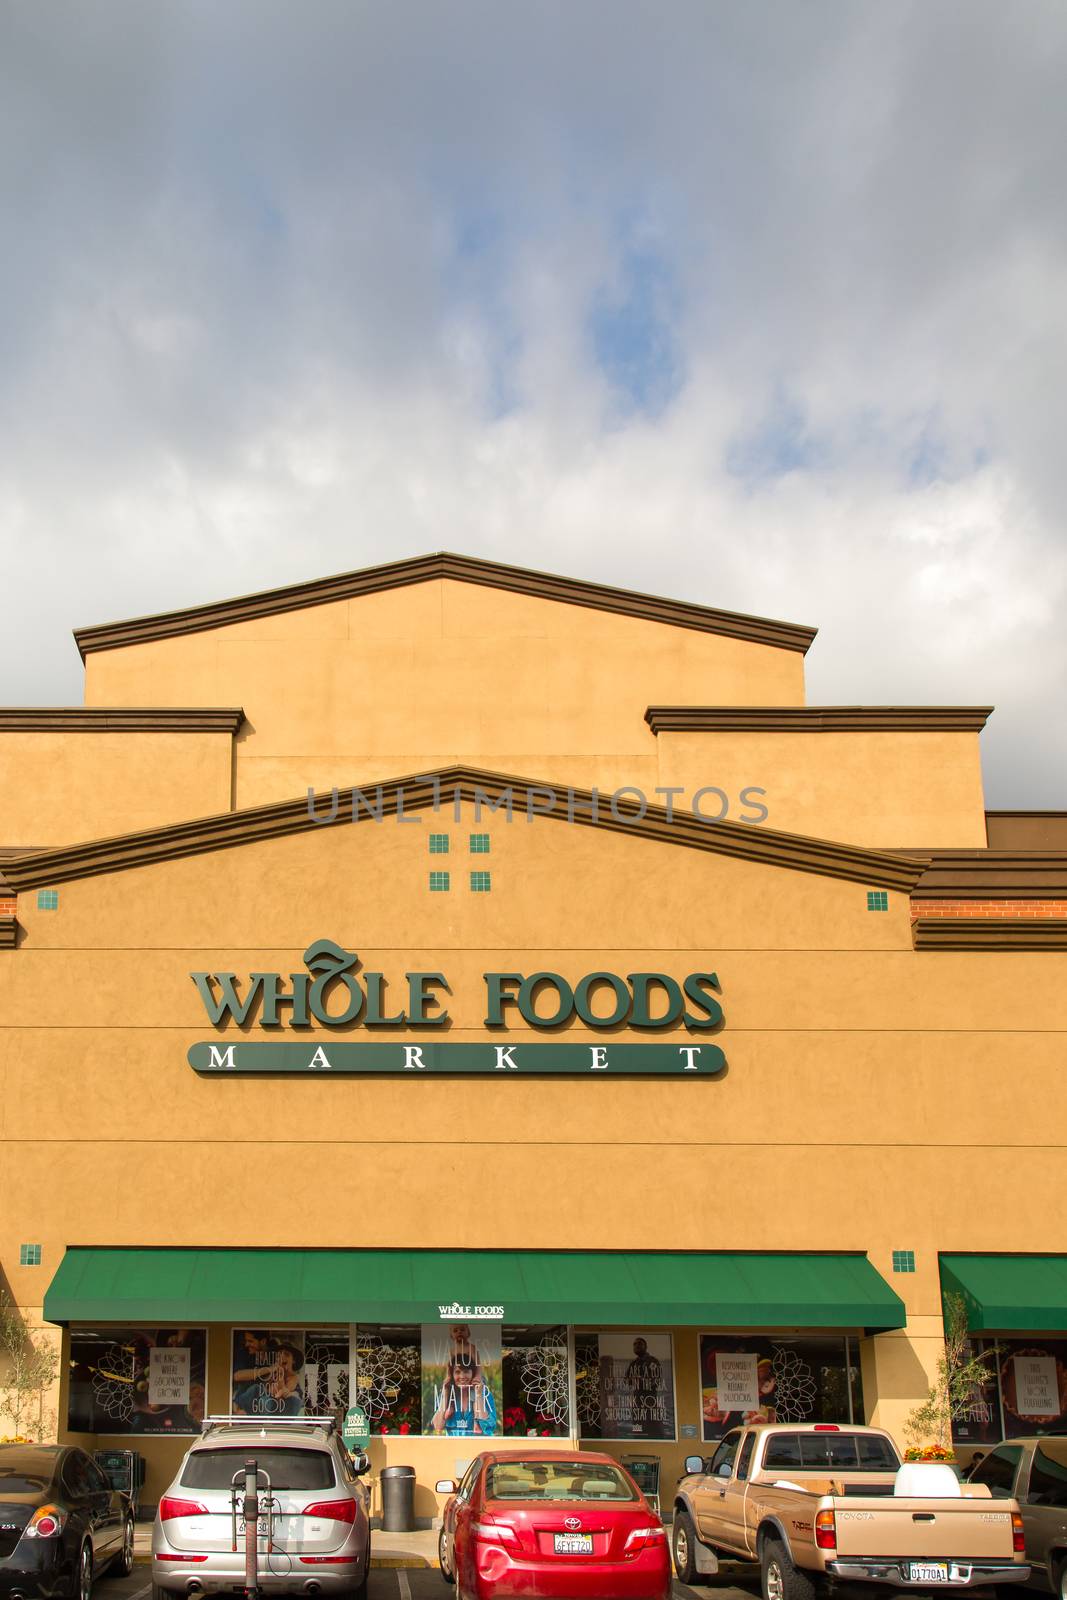 Whole Food Market Exterior by wolterk